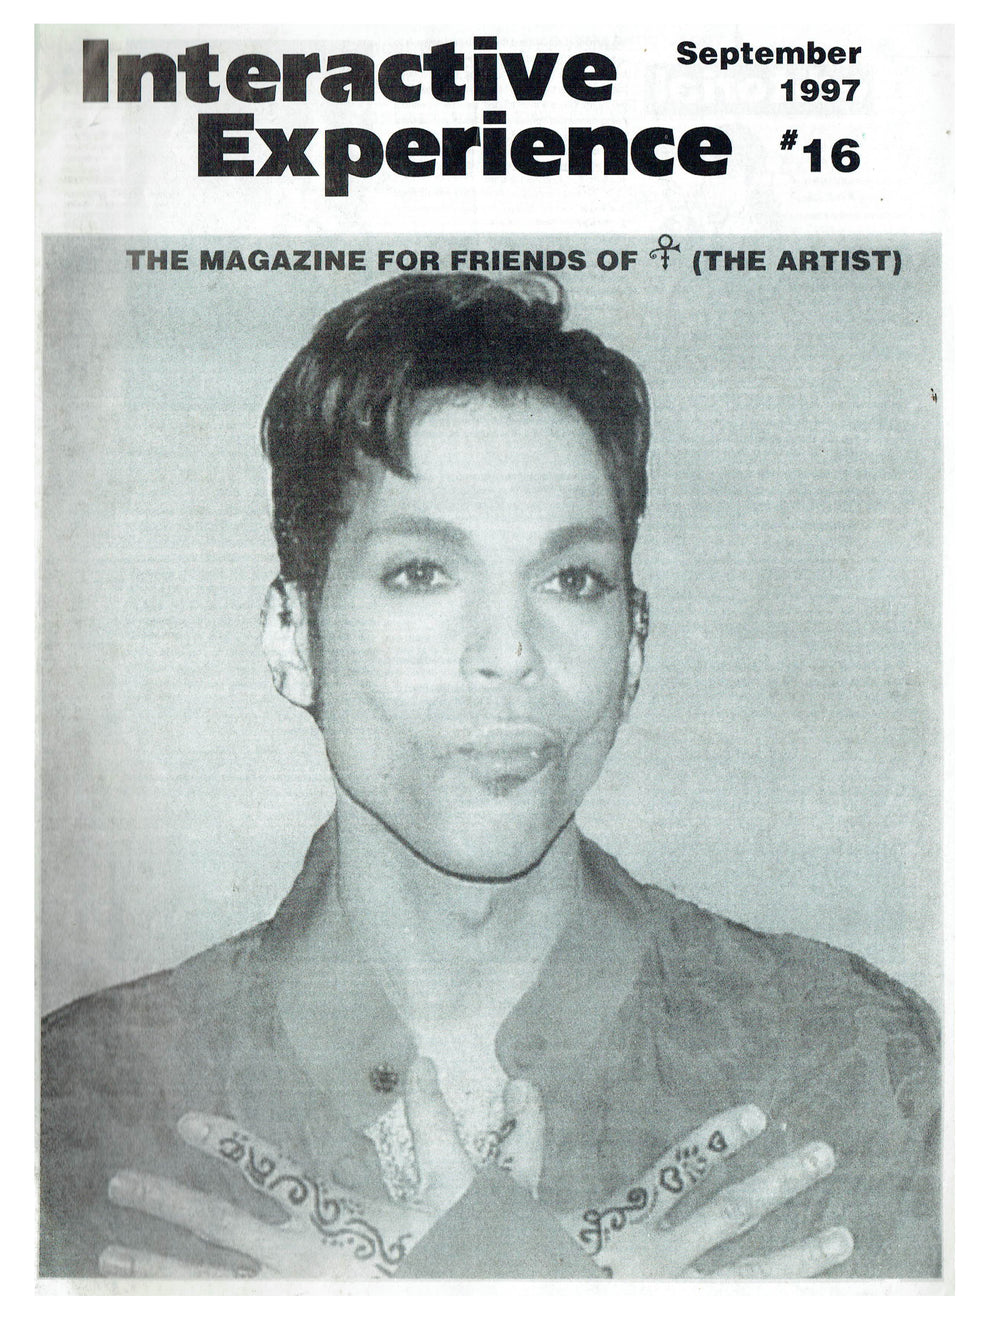 Interactive Experience Prince Fanzine Publication Issue 16 September 1997